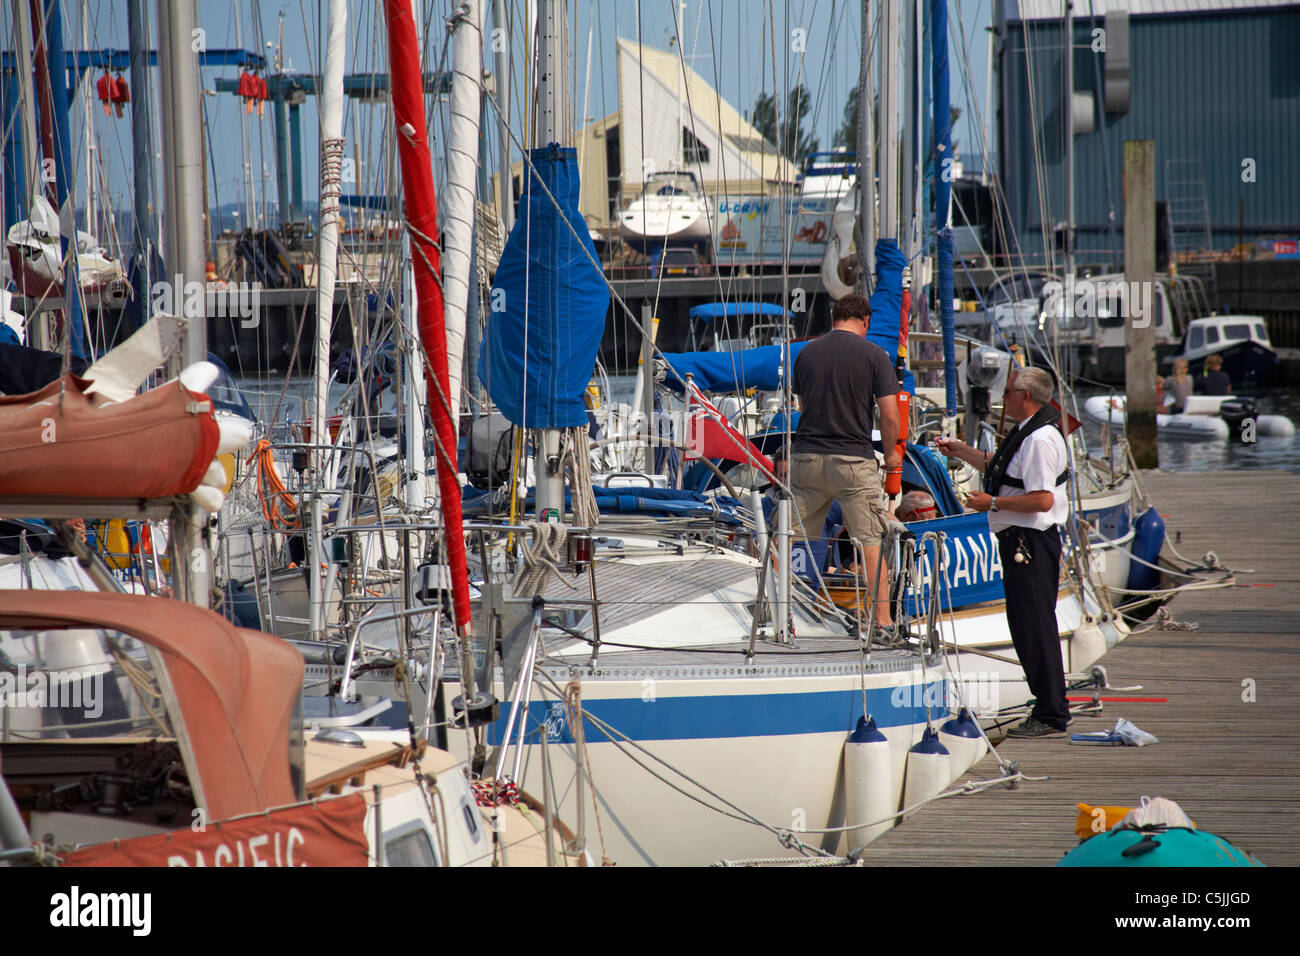 Harbour Master collecting berthing fees at Lymington Harbour quay, Lymington, Hampshire UK in June Stock Photo